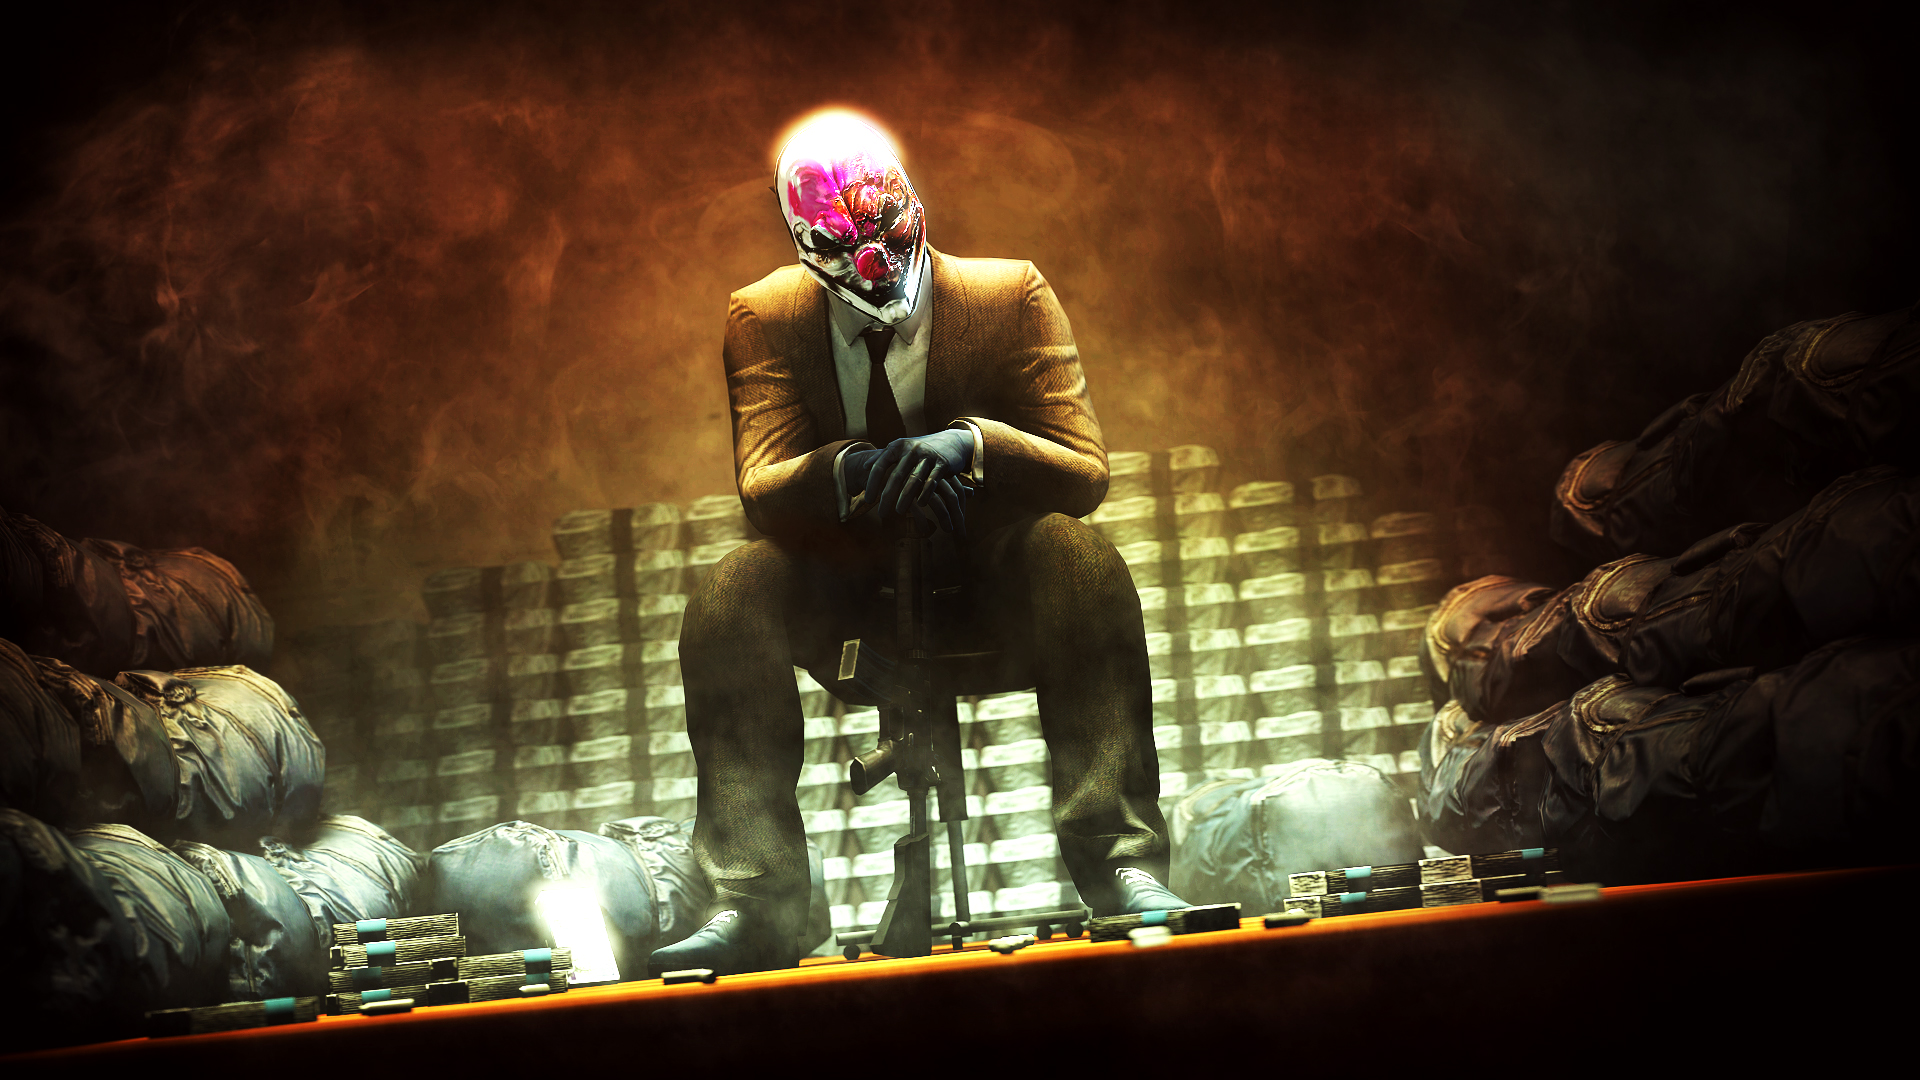 Wallpapers payday 2 games artwork on the desktop